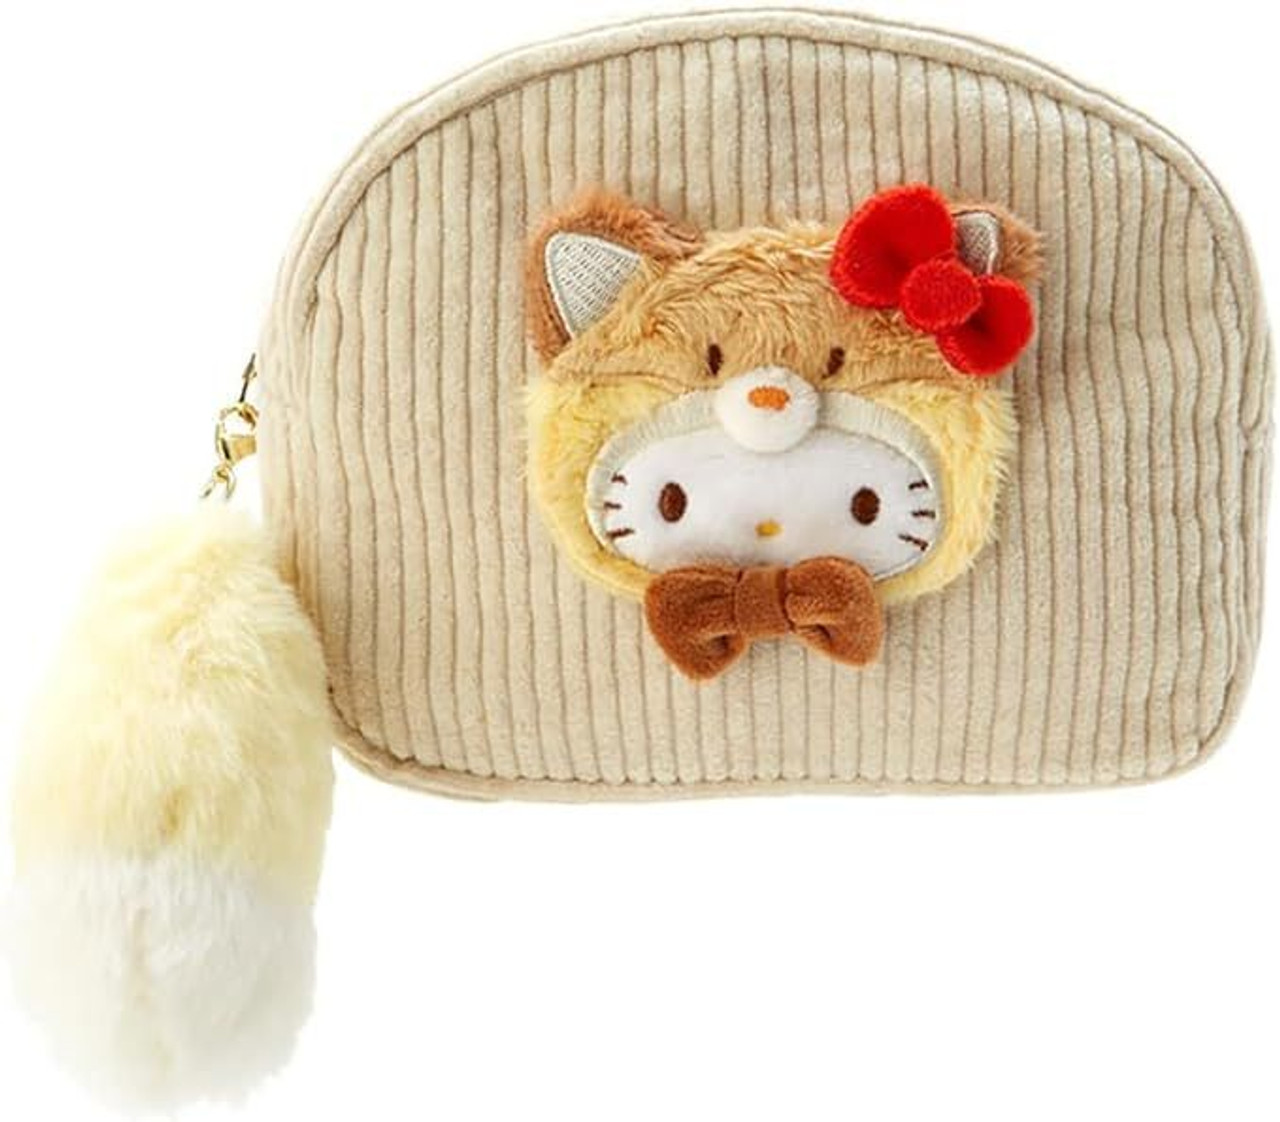 Shop Hello Kitty Item Collection Bag online